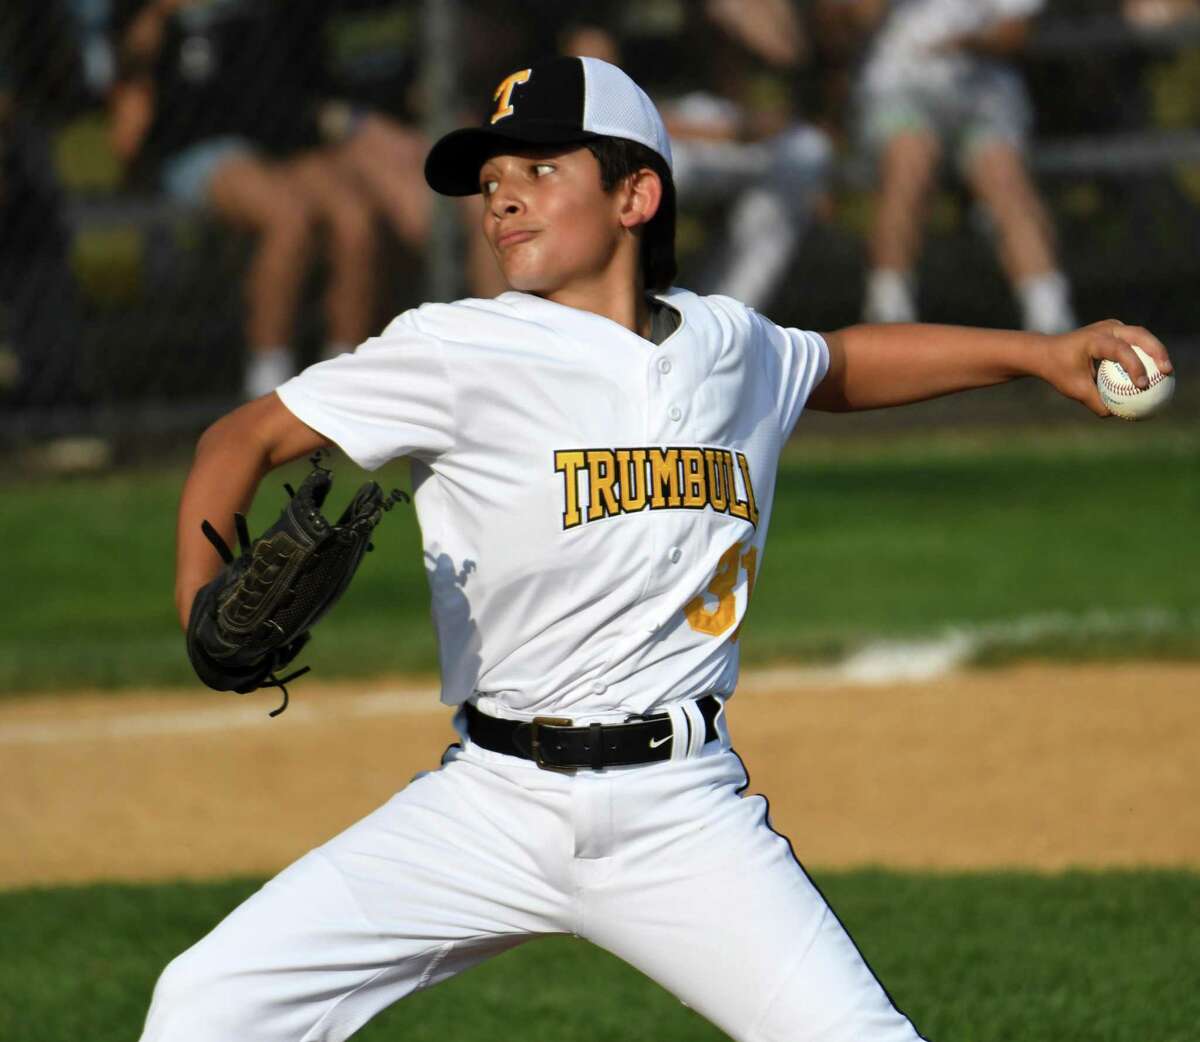 Trumbull's Brayden Showah pitches during the 12-under District 2 championship game between Fairfield American and Trumbull at Unity Park, Trumbull on Friday, July 15, 2022.